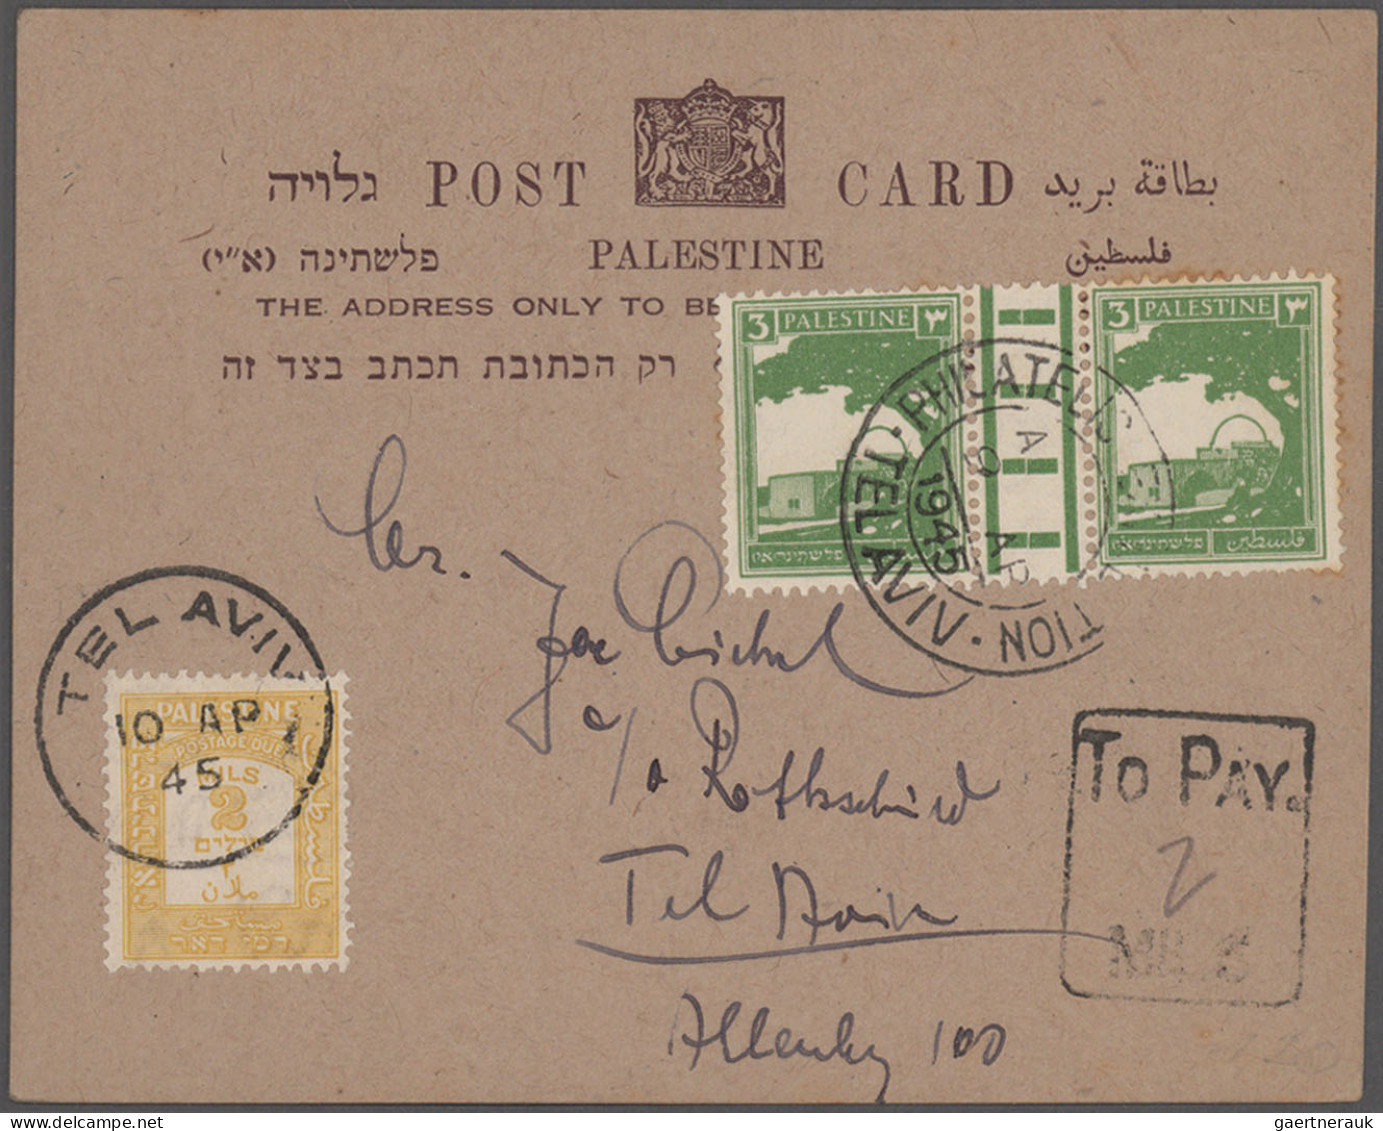 Israel: 1943/1953, Palestine+early Israel, lot of ten covers/cards incl. Palesti